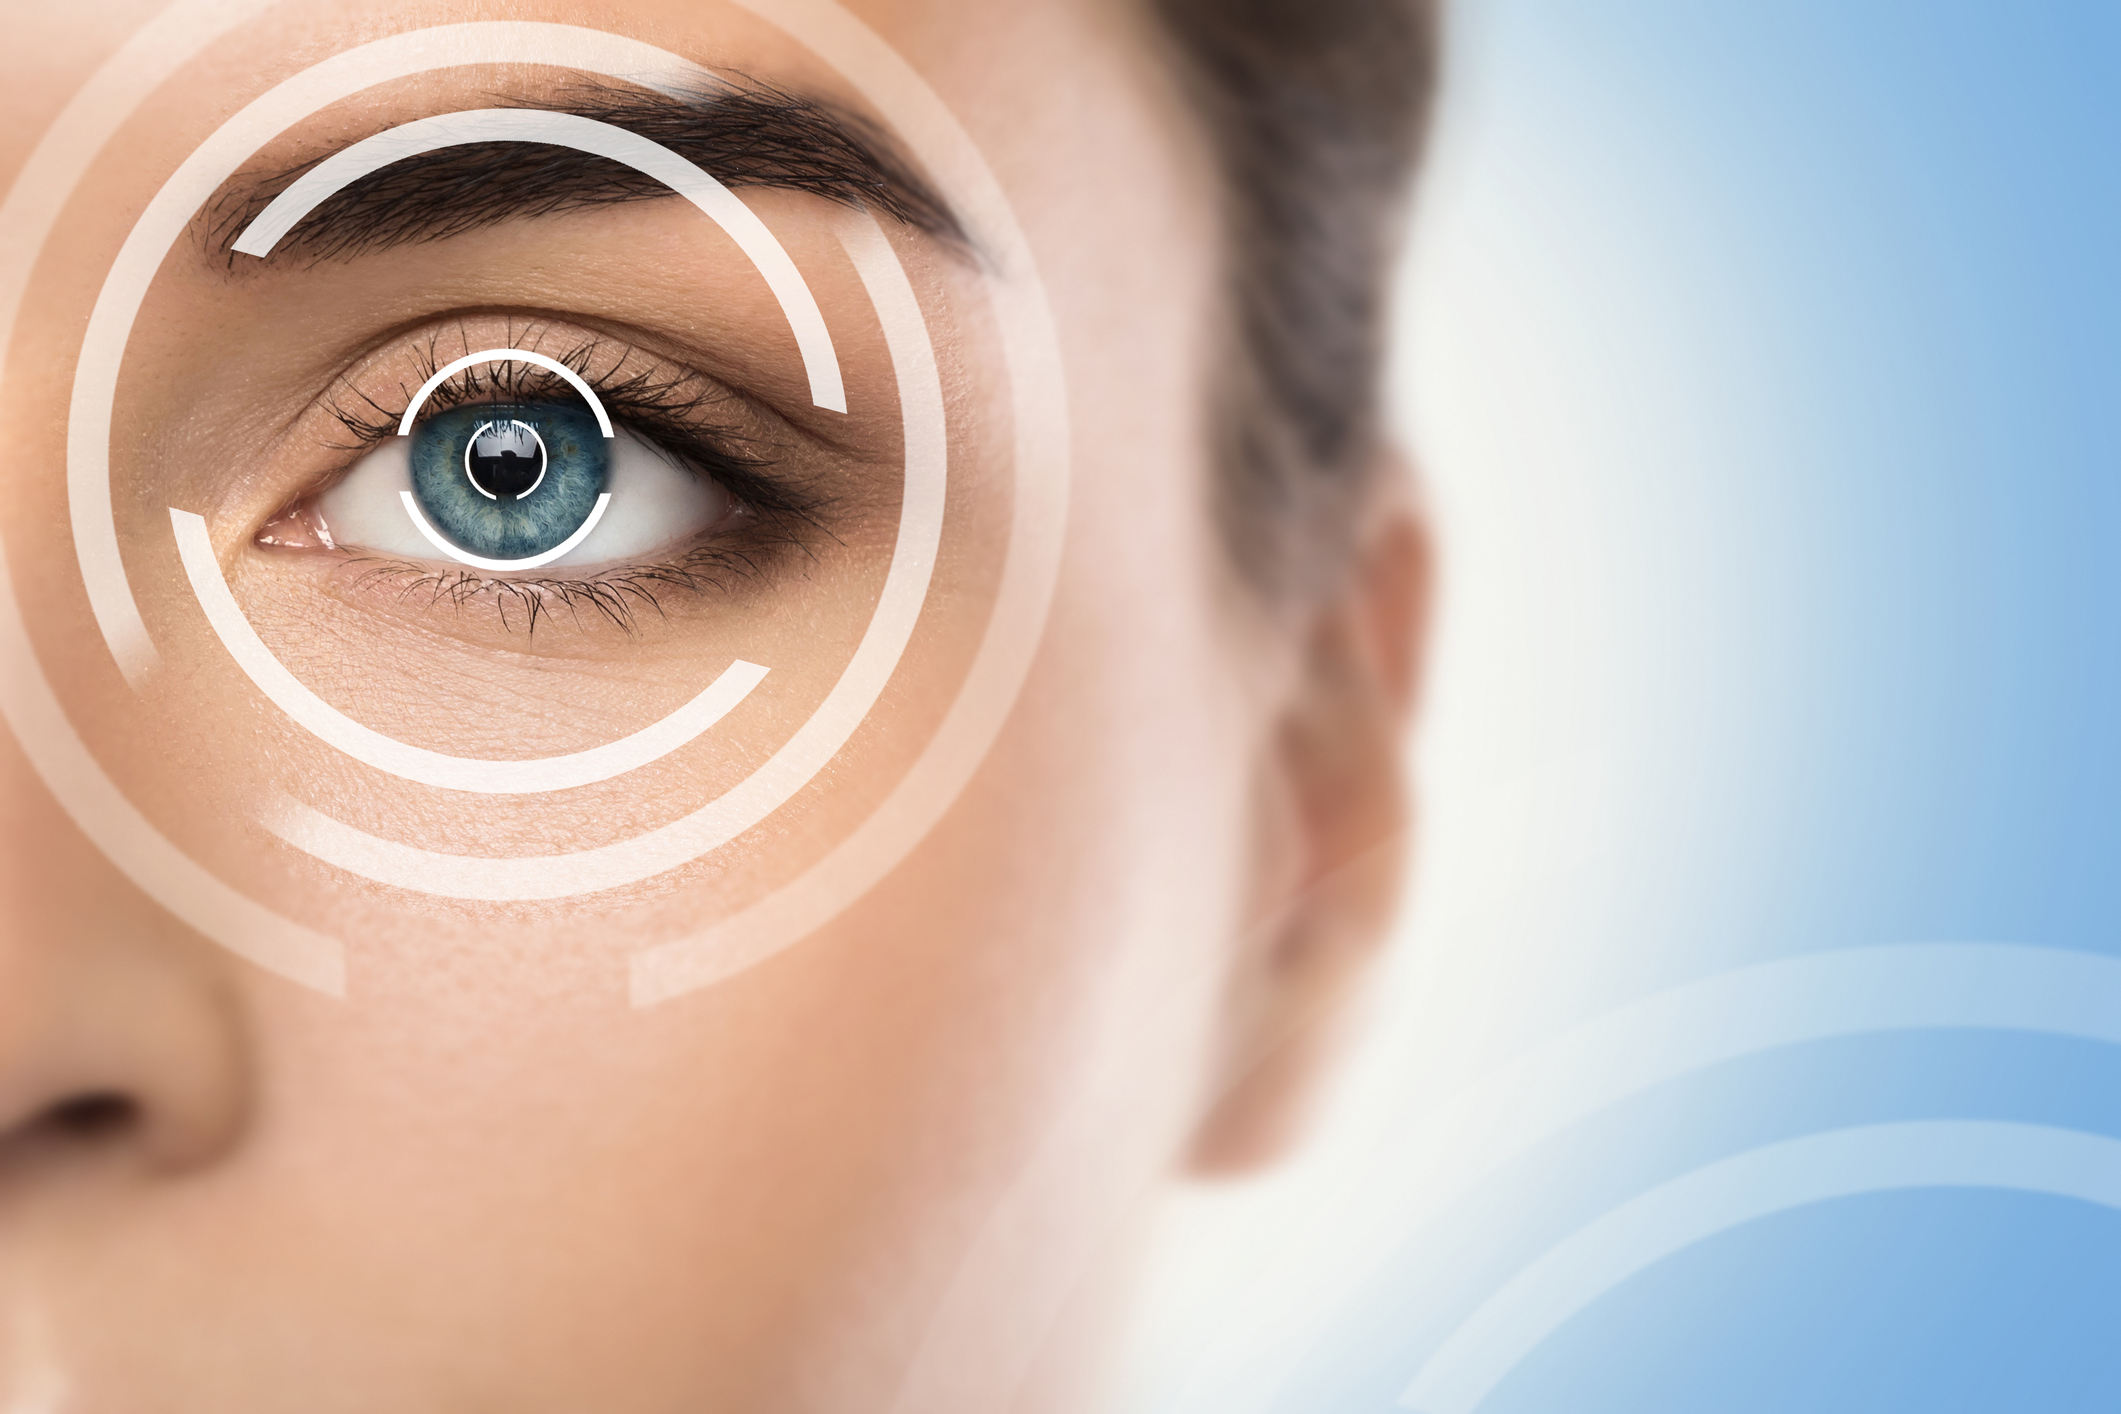 Use these preemptive tips before going for LASIK